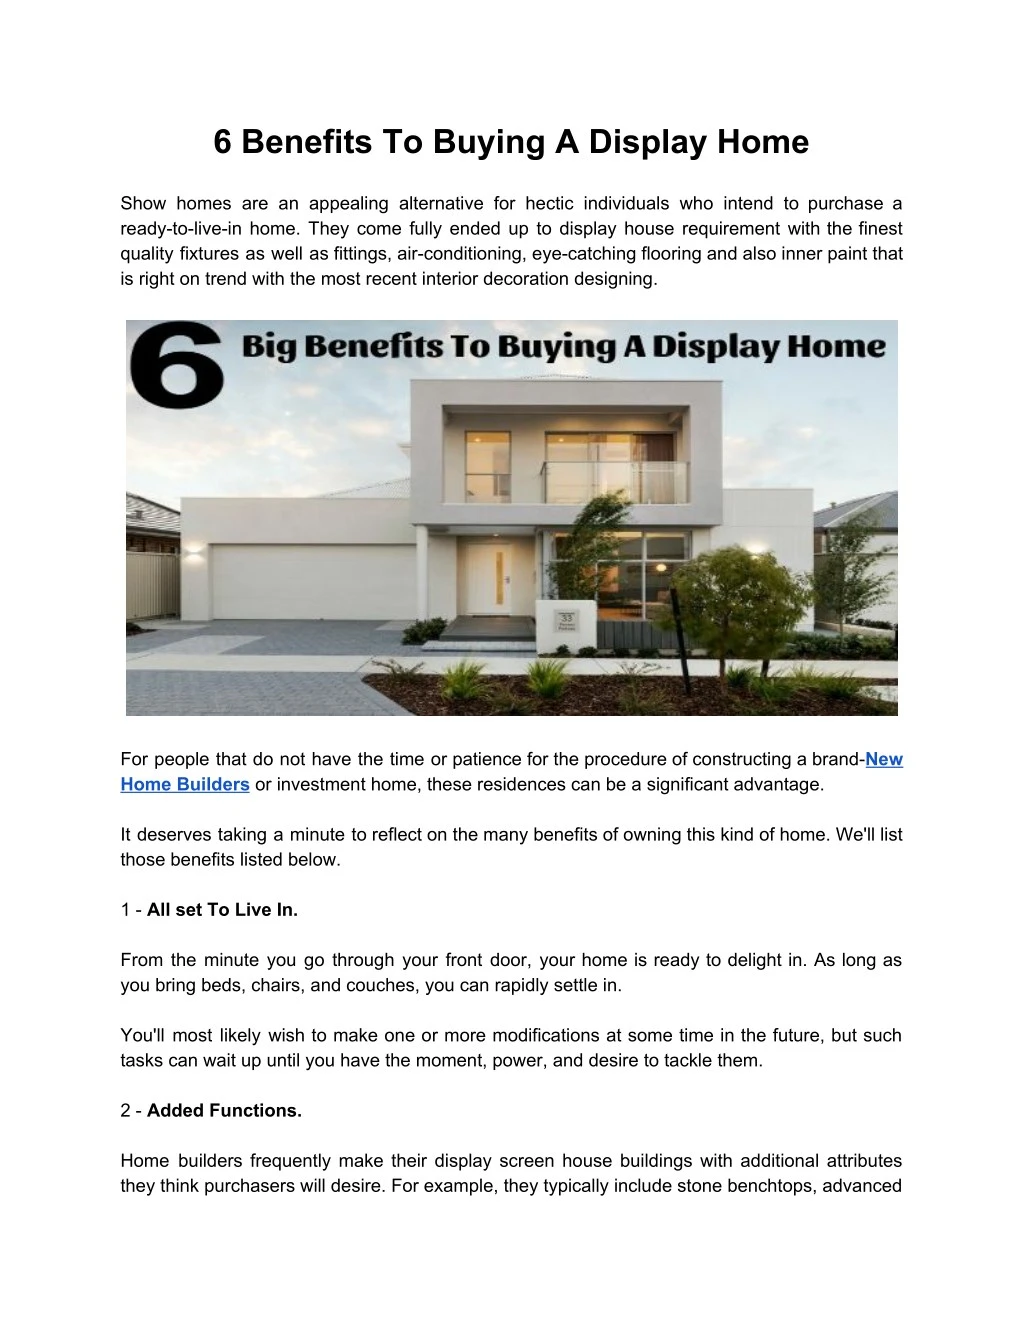 6 benefits to buying a display home